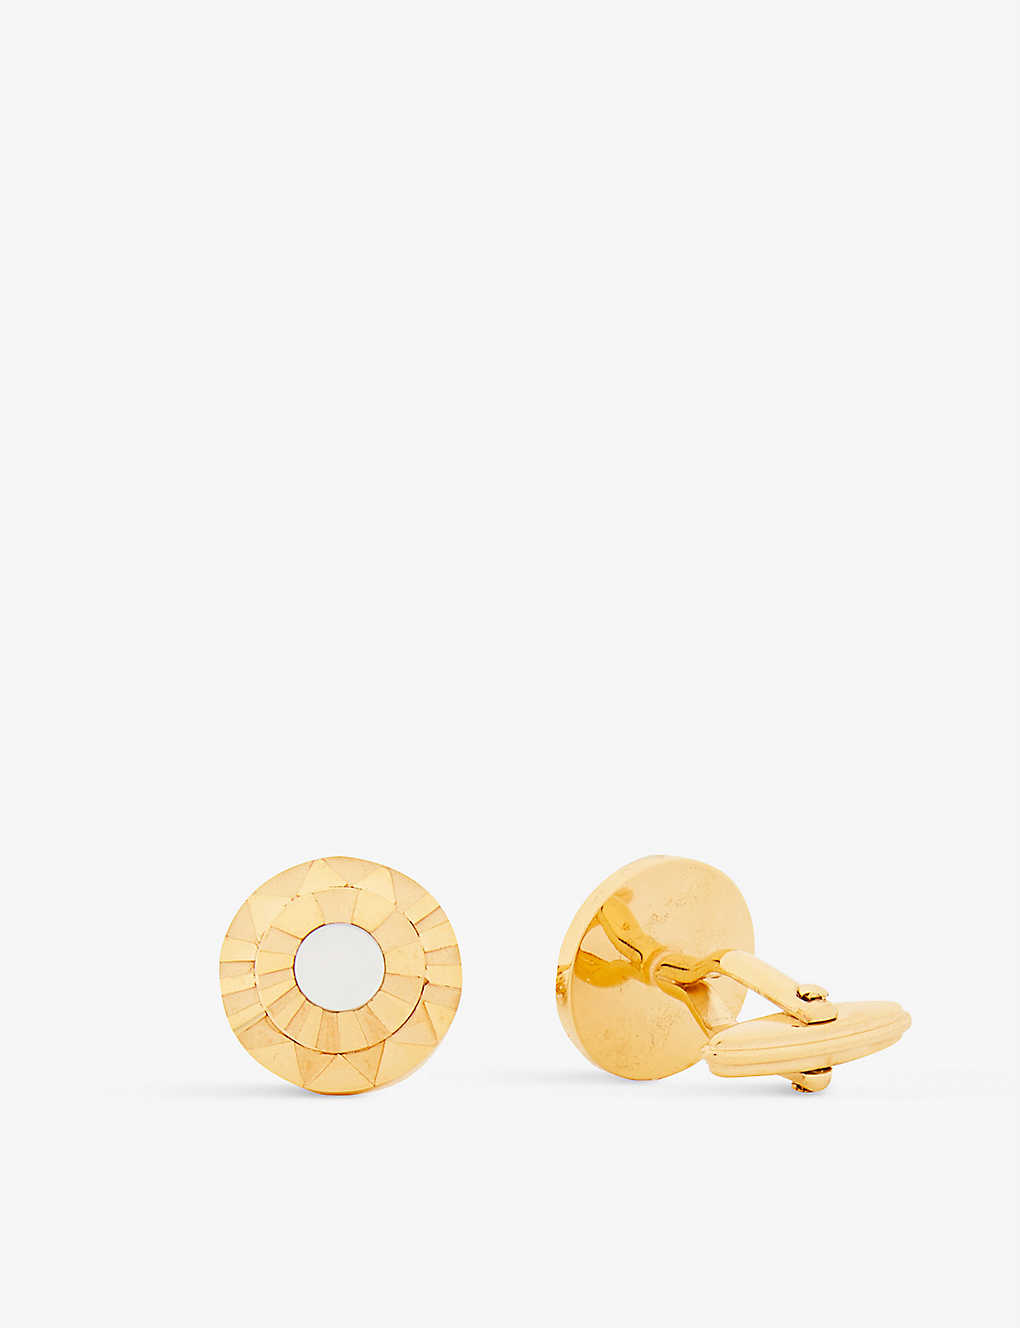 Embossed gold-brass and mother of pearl cufflinks Selfridges & Co Men Accessories Jewelry Cufflinks 